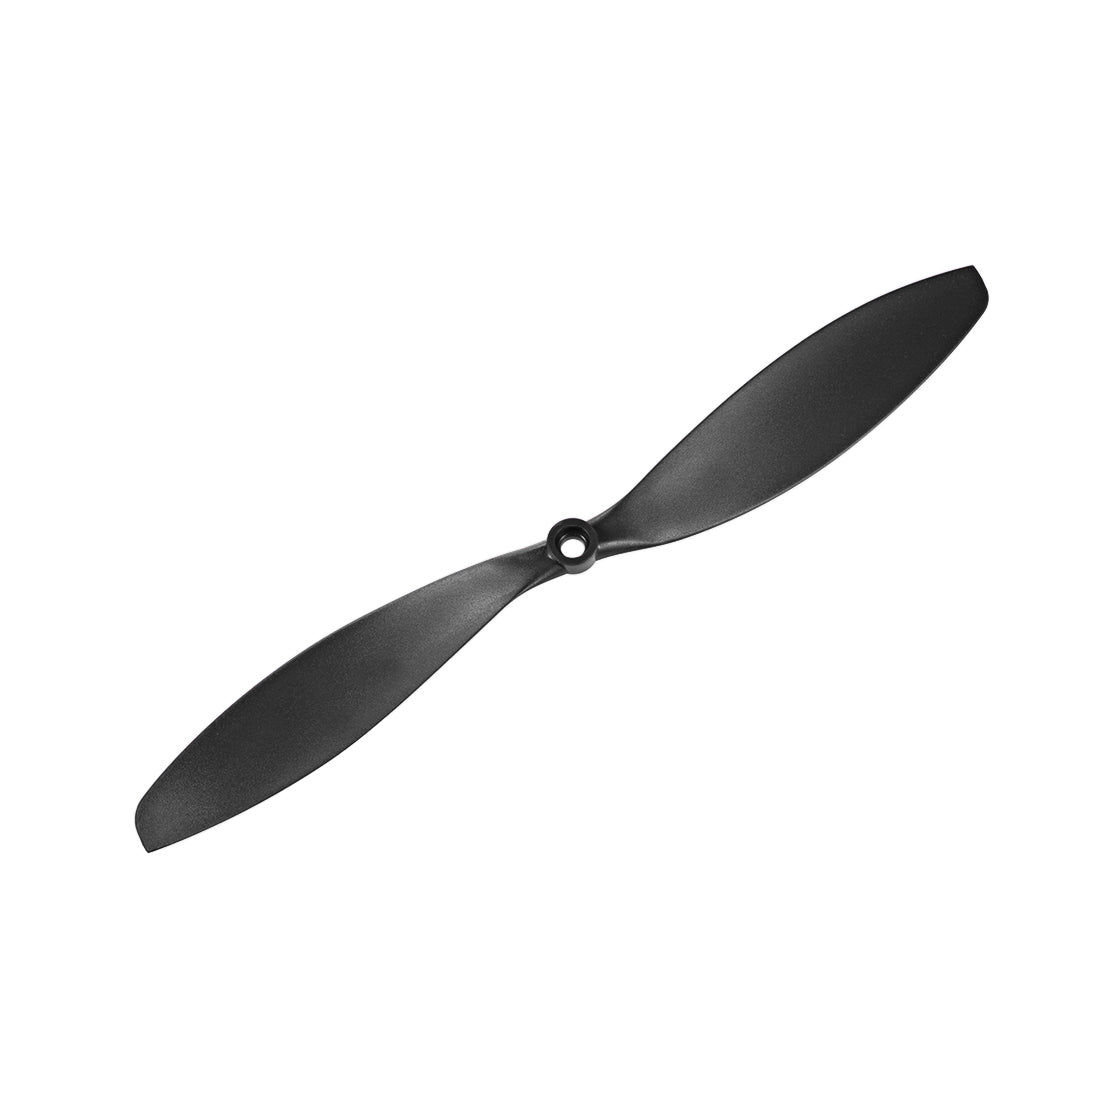 uxcell Uxcell RC Propellers CW CCW 1147 11x4.7 Inch 2-Vane Fixed-Wing for Airplane Toy, Nylon Black 2 Pair with Adapter Rings